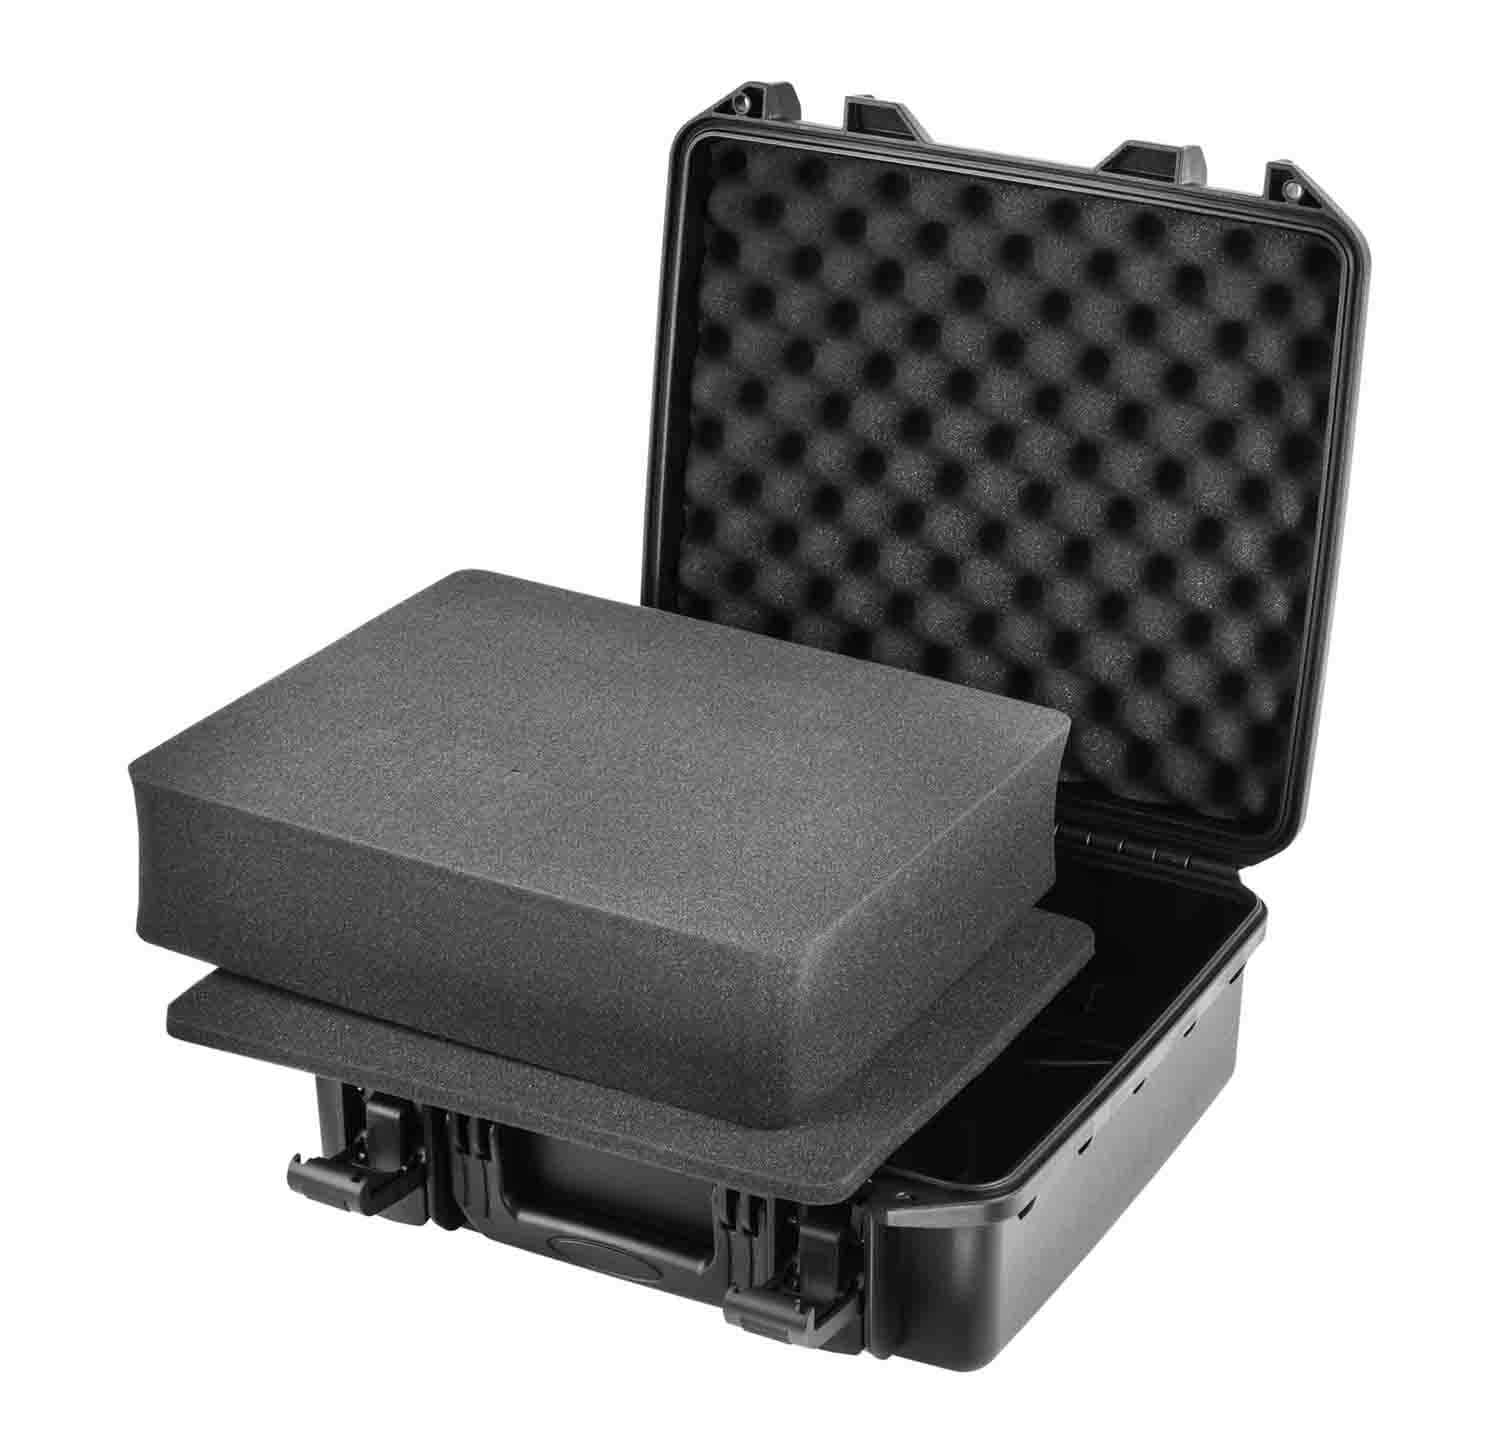 Odyssey VU120905 Vulcan Injection-Molded Utility Case with Pluck Foam - 13.75 x 11.75 x 3.75" Interior - Hollywood DJ